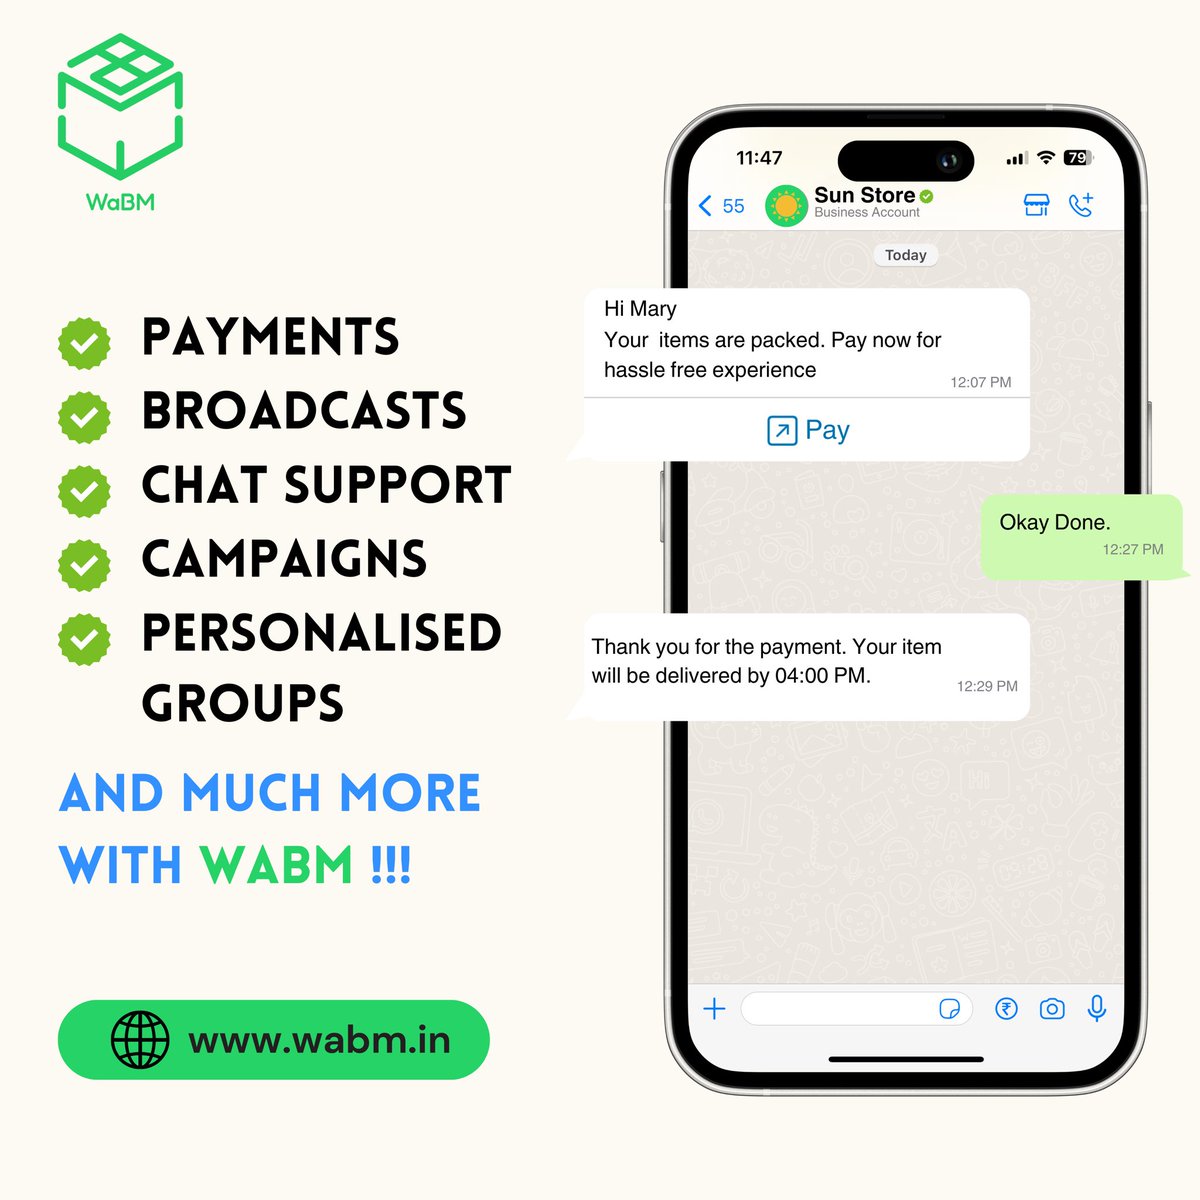 🚀😎 Manage your store like a pro 😎🚀

Be it Payments, Broadcasts or Campaigns manage everything at you fingertips with WABM.

Contact us today to revolutionise your business. 🌐

#storemanagement #whatsappmarketing #whatsappbusinessapi #payments #security #Wabm